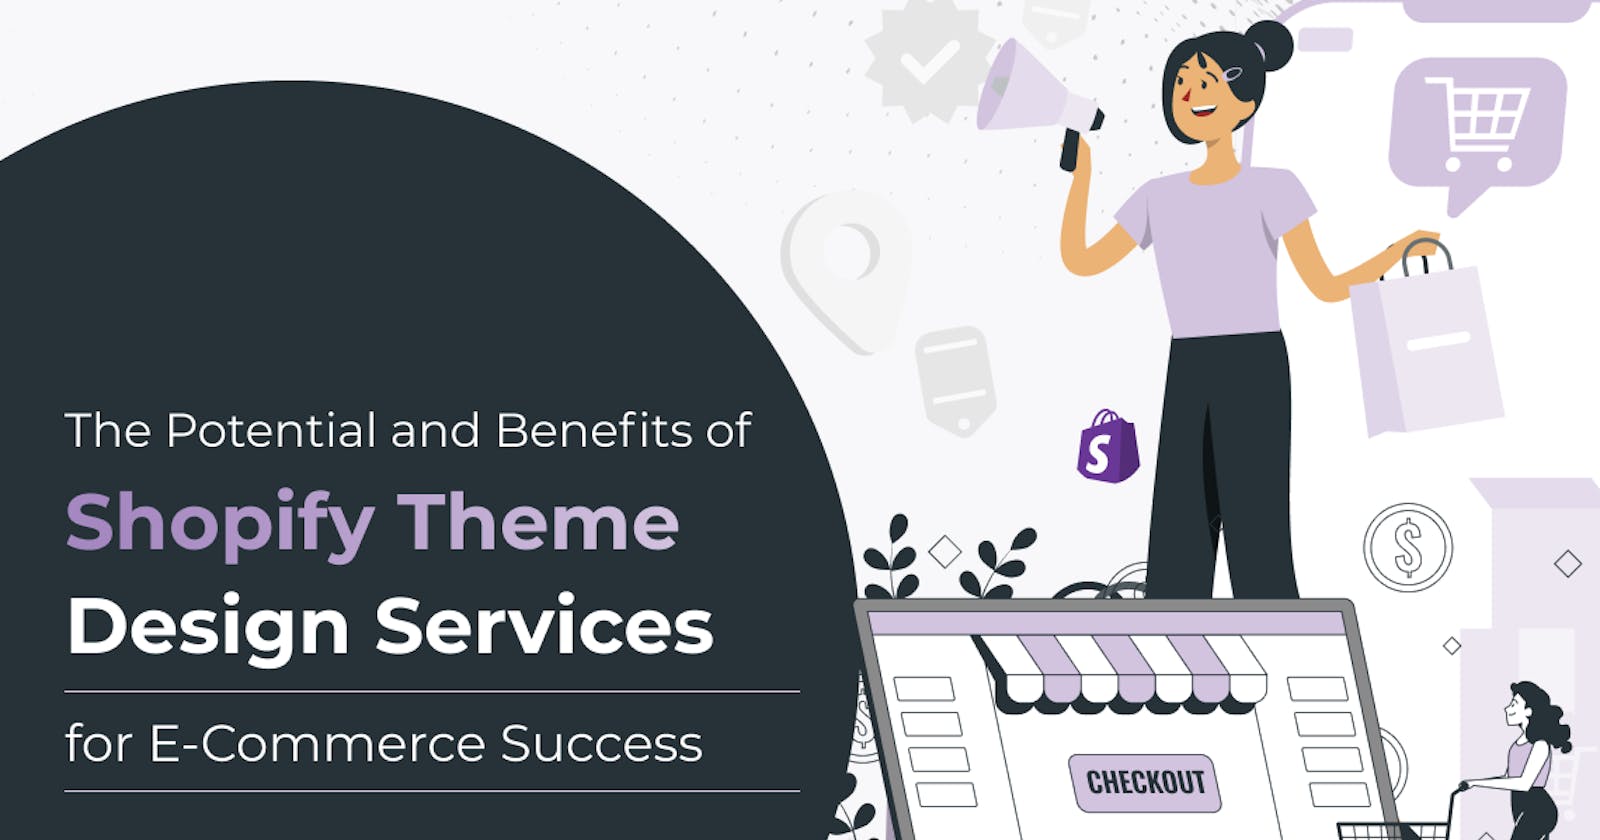 The Potential and Benefits of Shopify Theme Design Services for E-Commerce Success